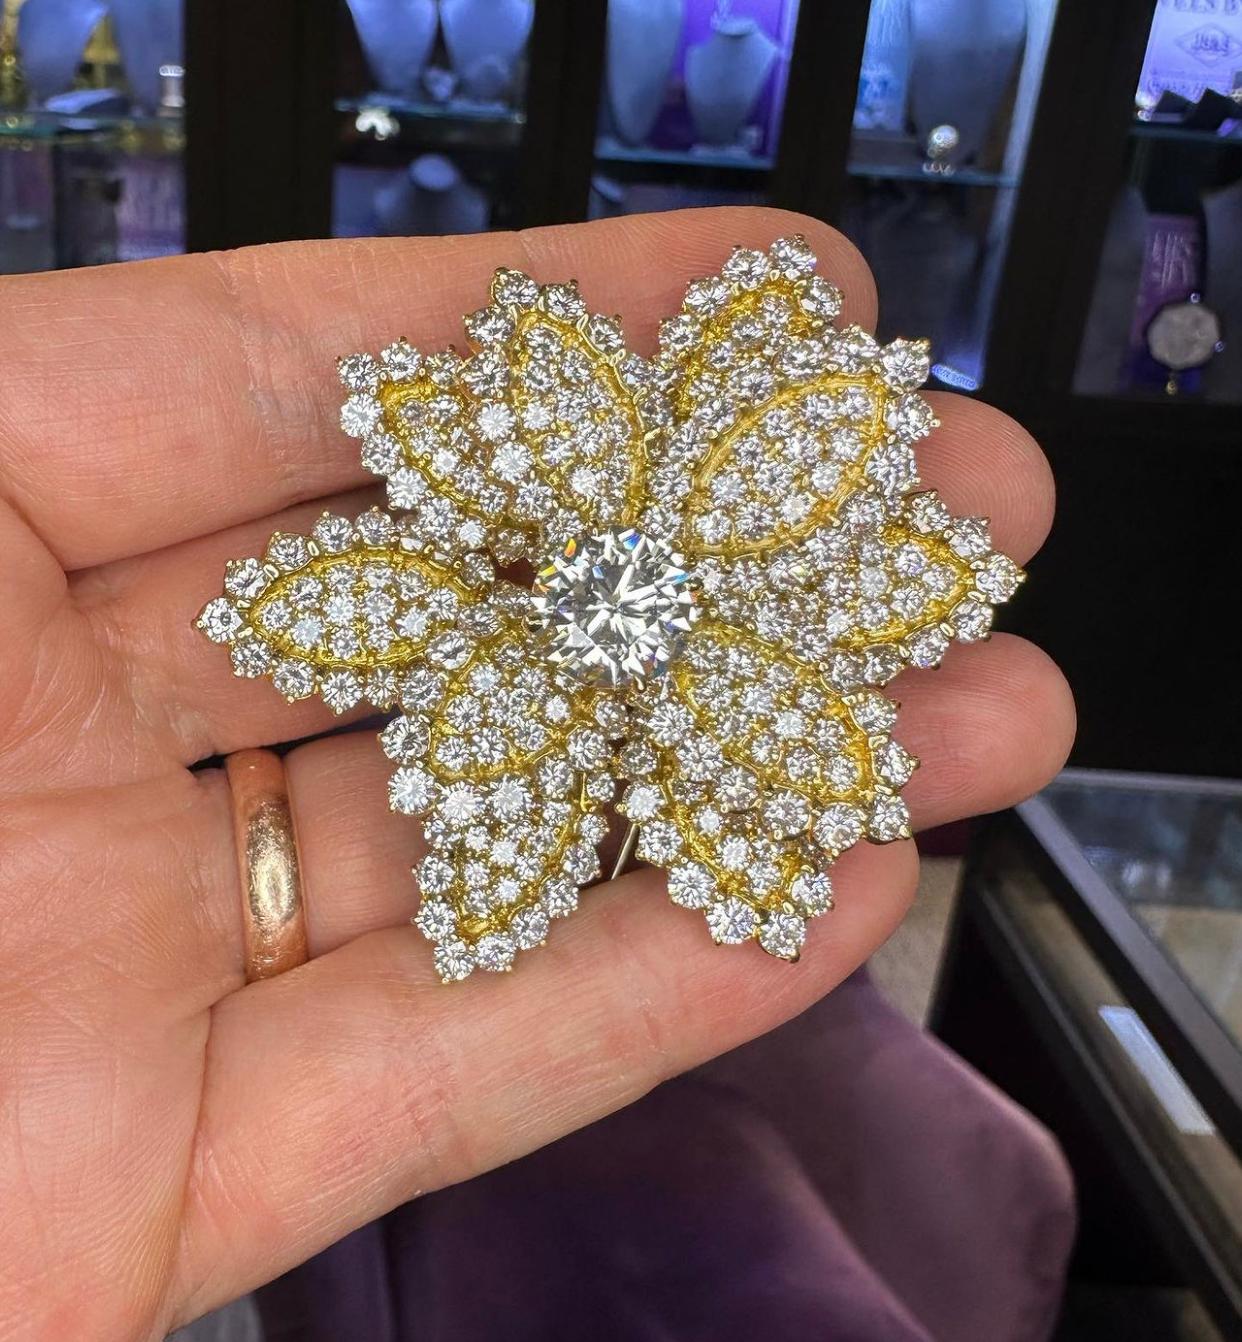 Diamond & Yellow Gold Flower Brooch

A floral motif brooch made from 18-karat yellow gold, featuring round-cut diamonds adorning the petals that frame a central large round-cut diamond

Approximate Center Diamond Weight: 4.25
Stamped 750

Diameter: